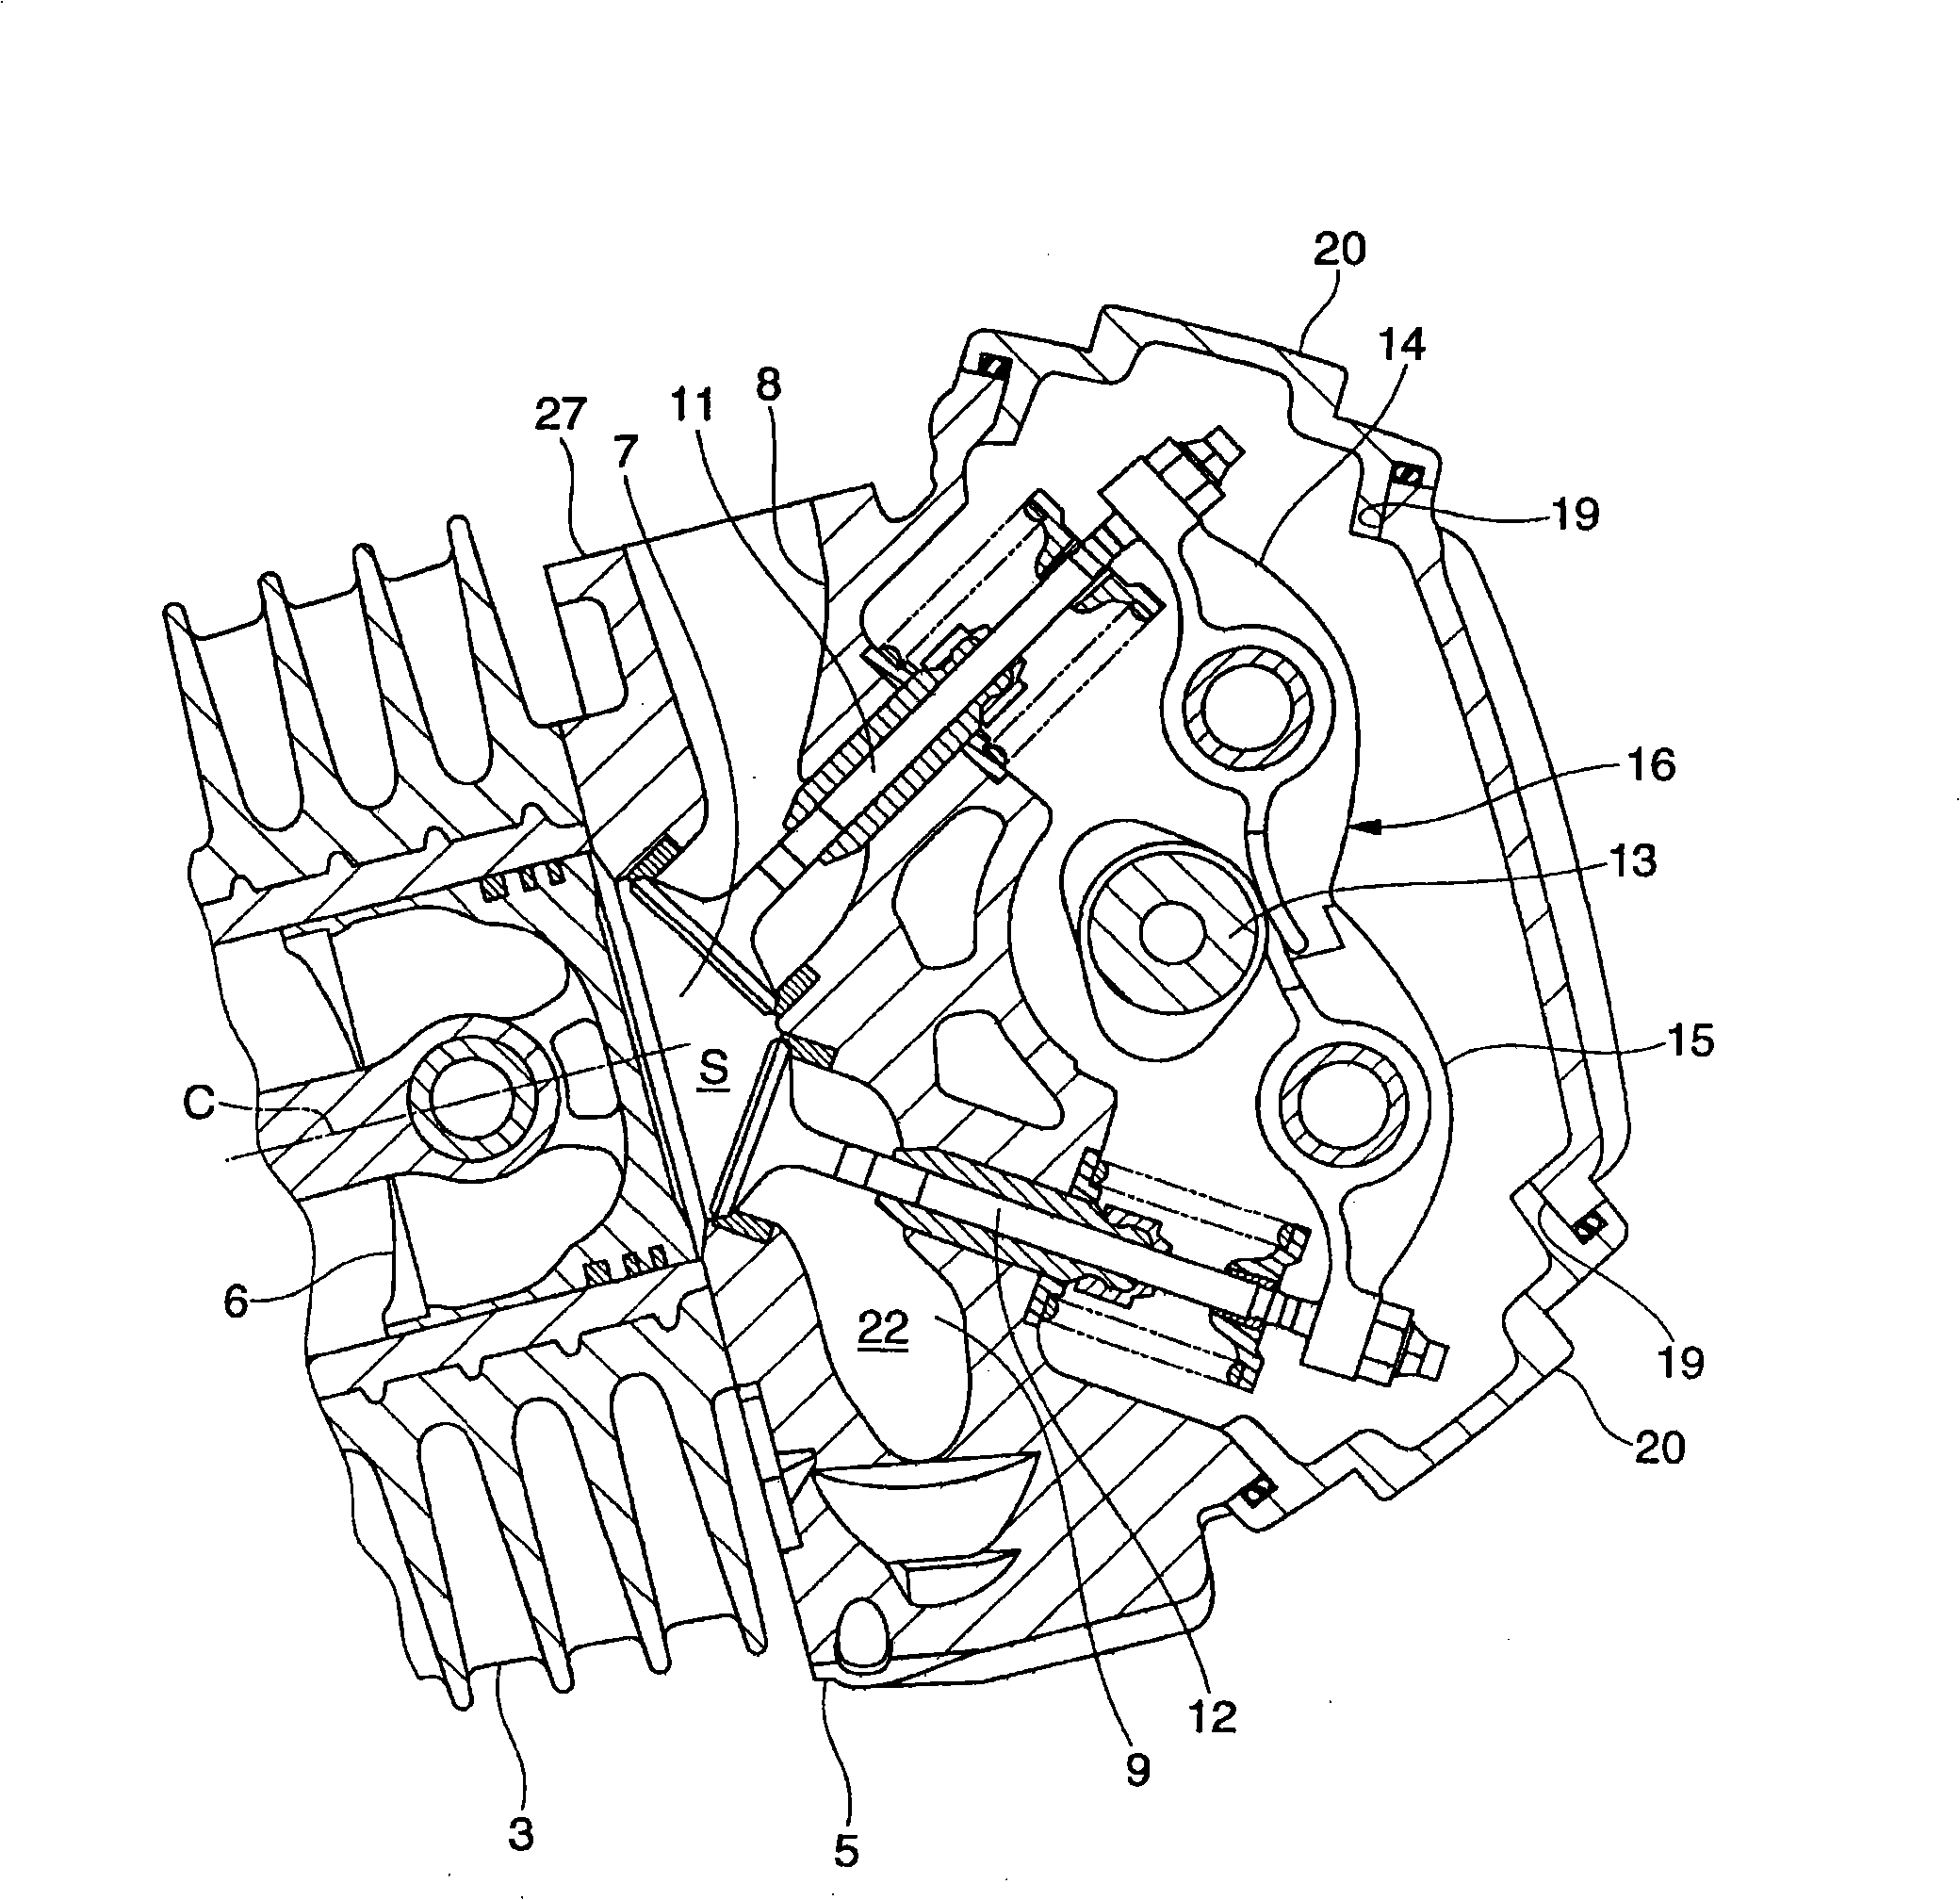 Engine and motorcycle engine